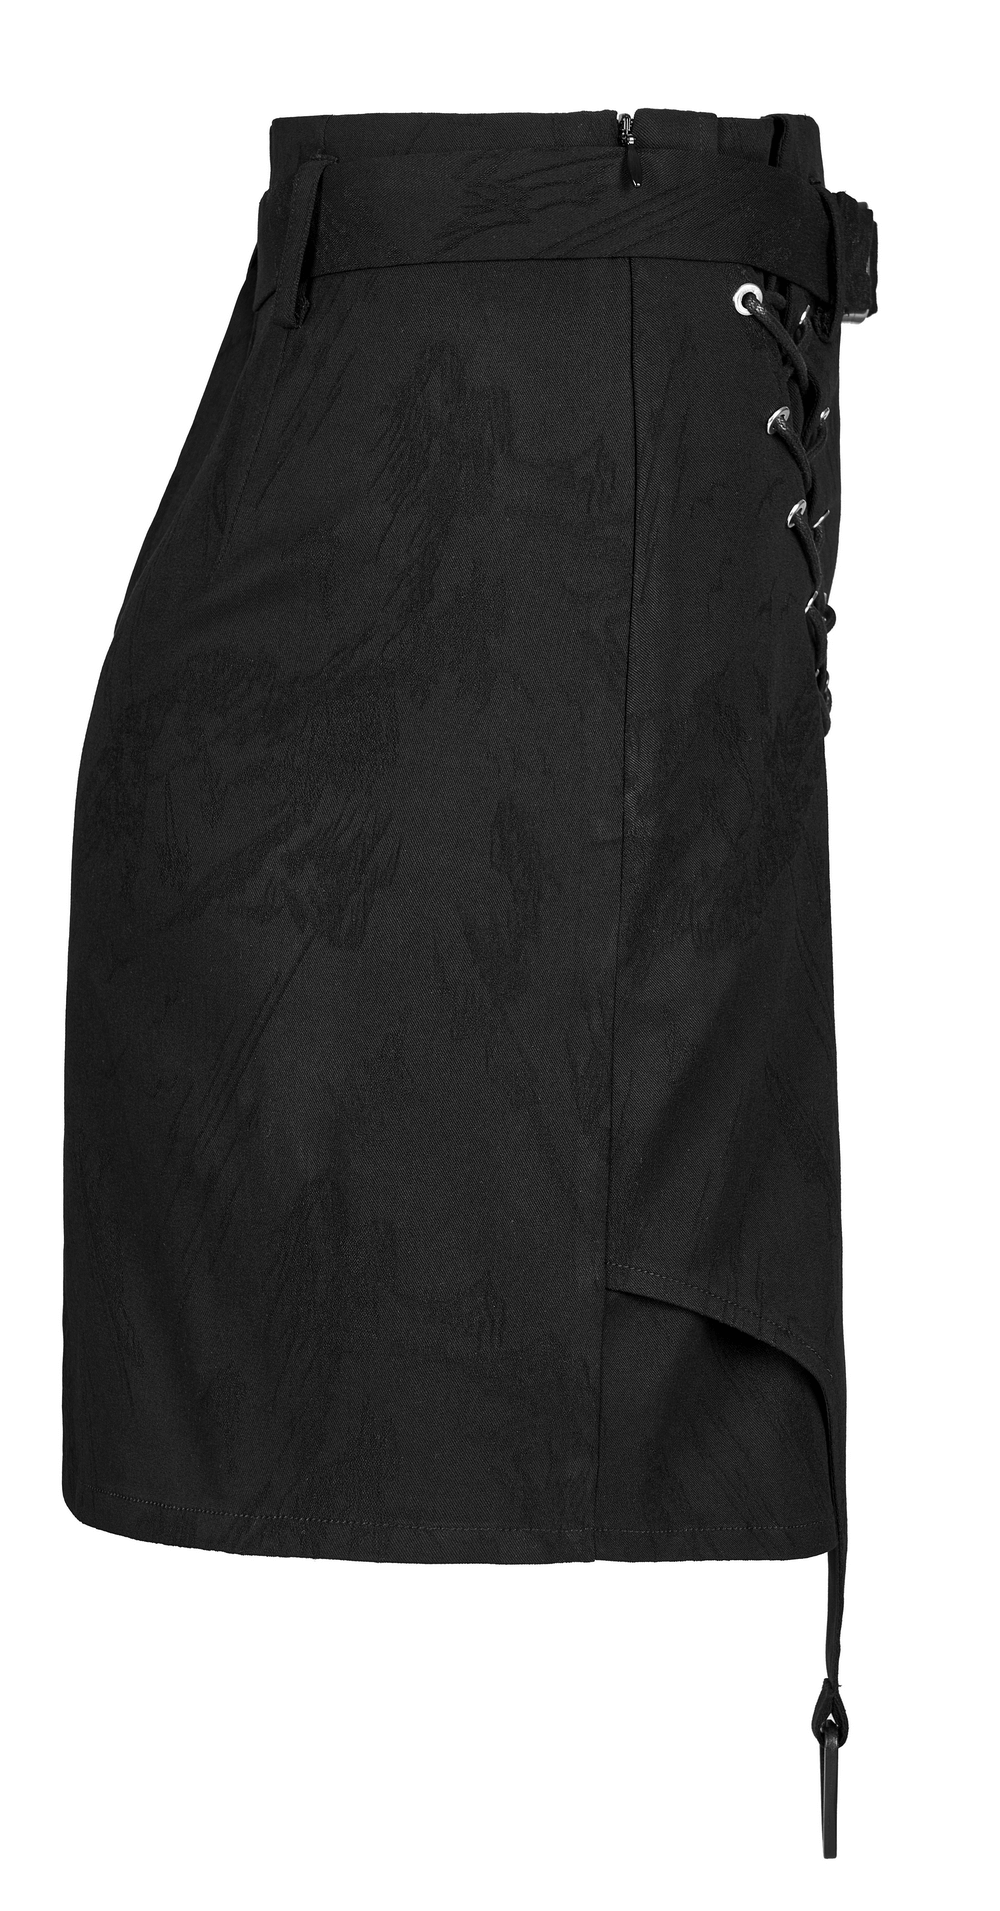 Chic Black Asymmetric Skirt with Lace-Up Accents